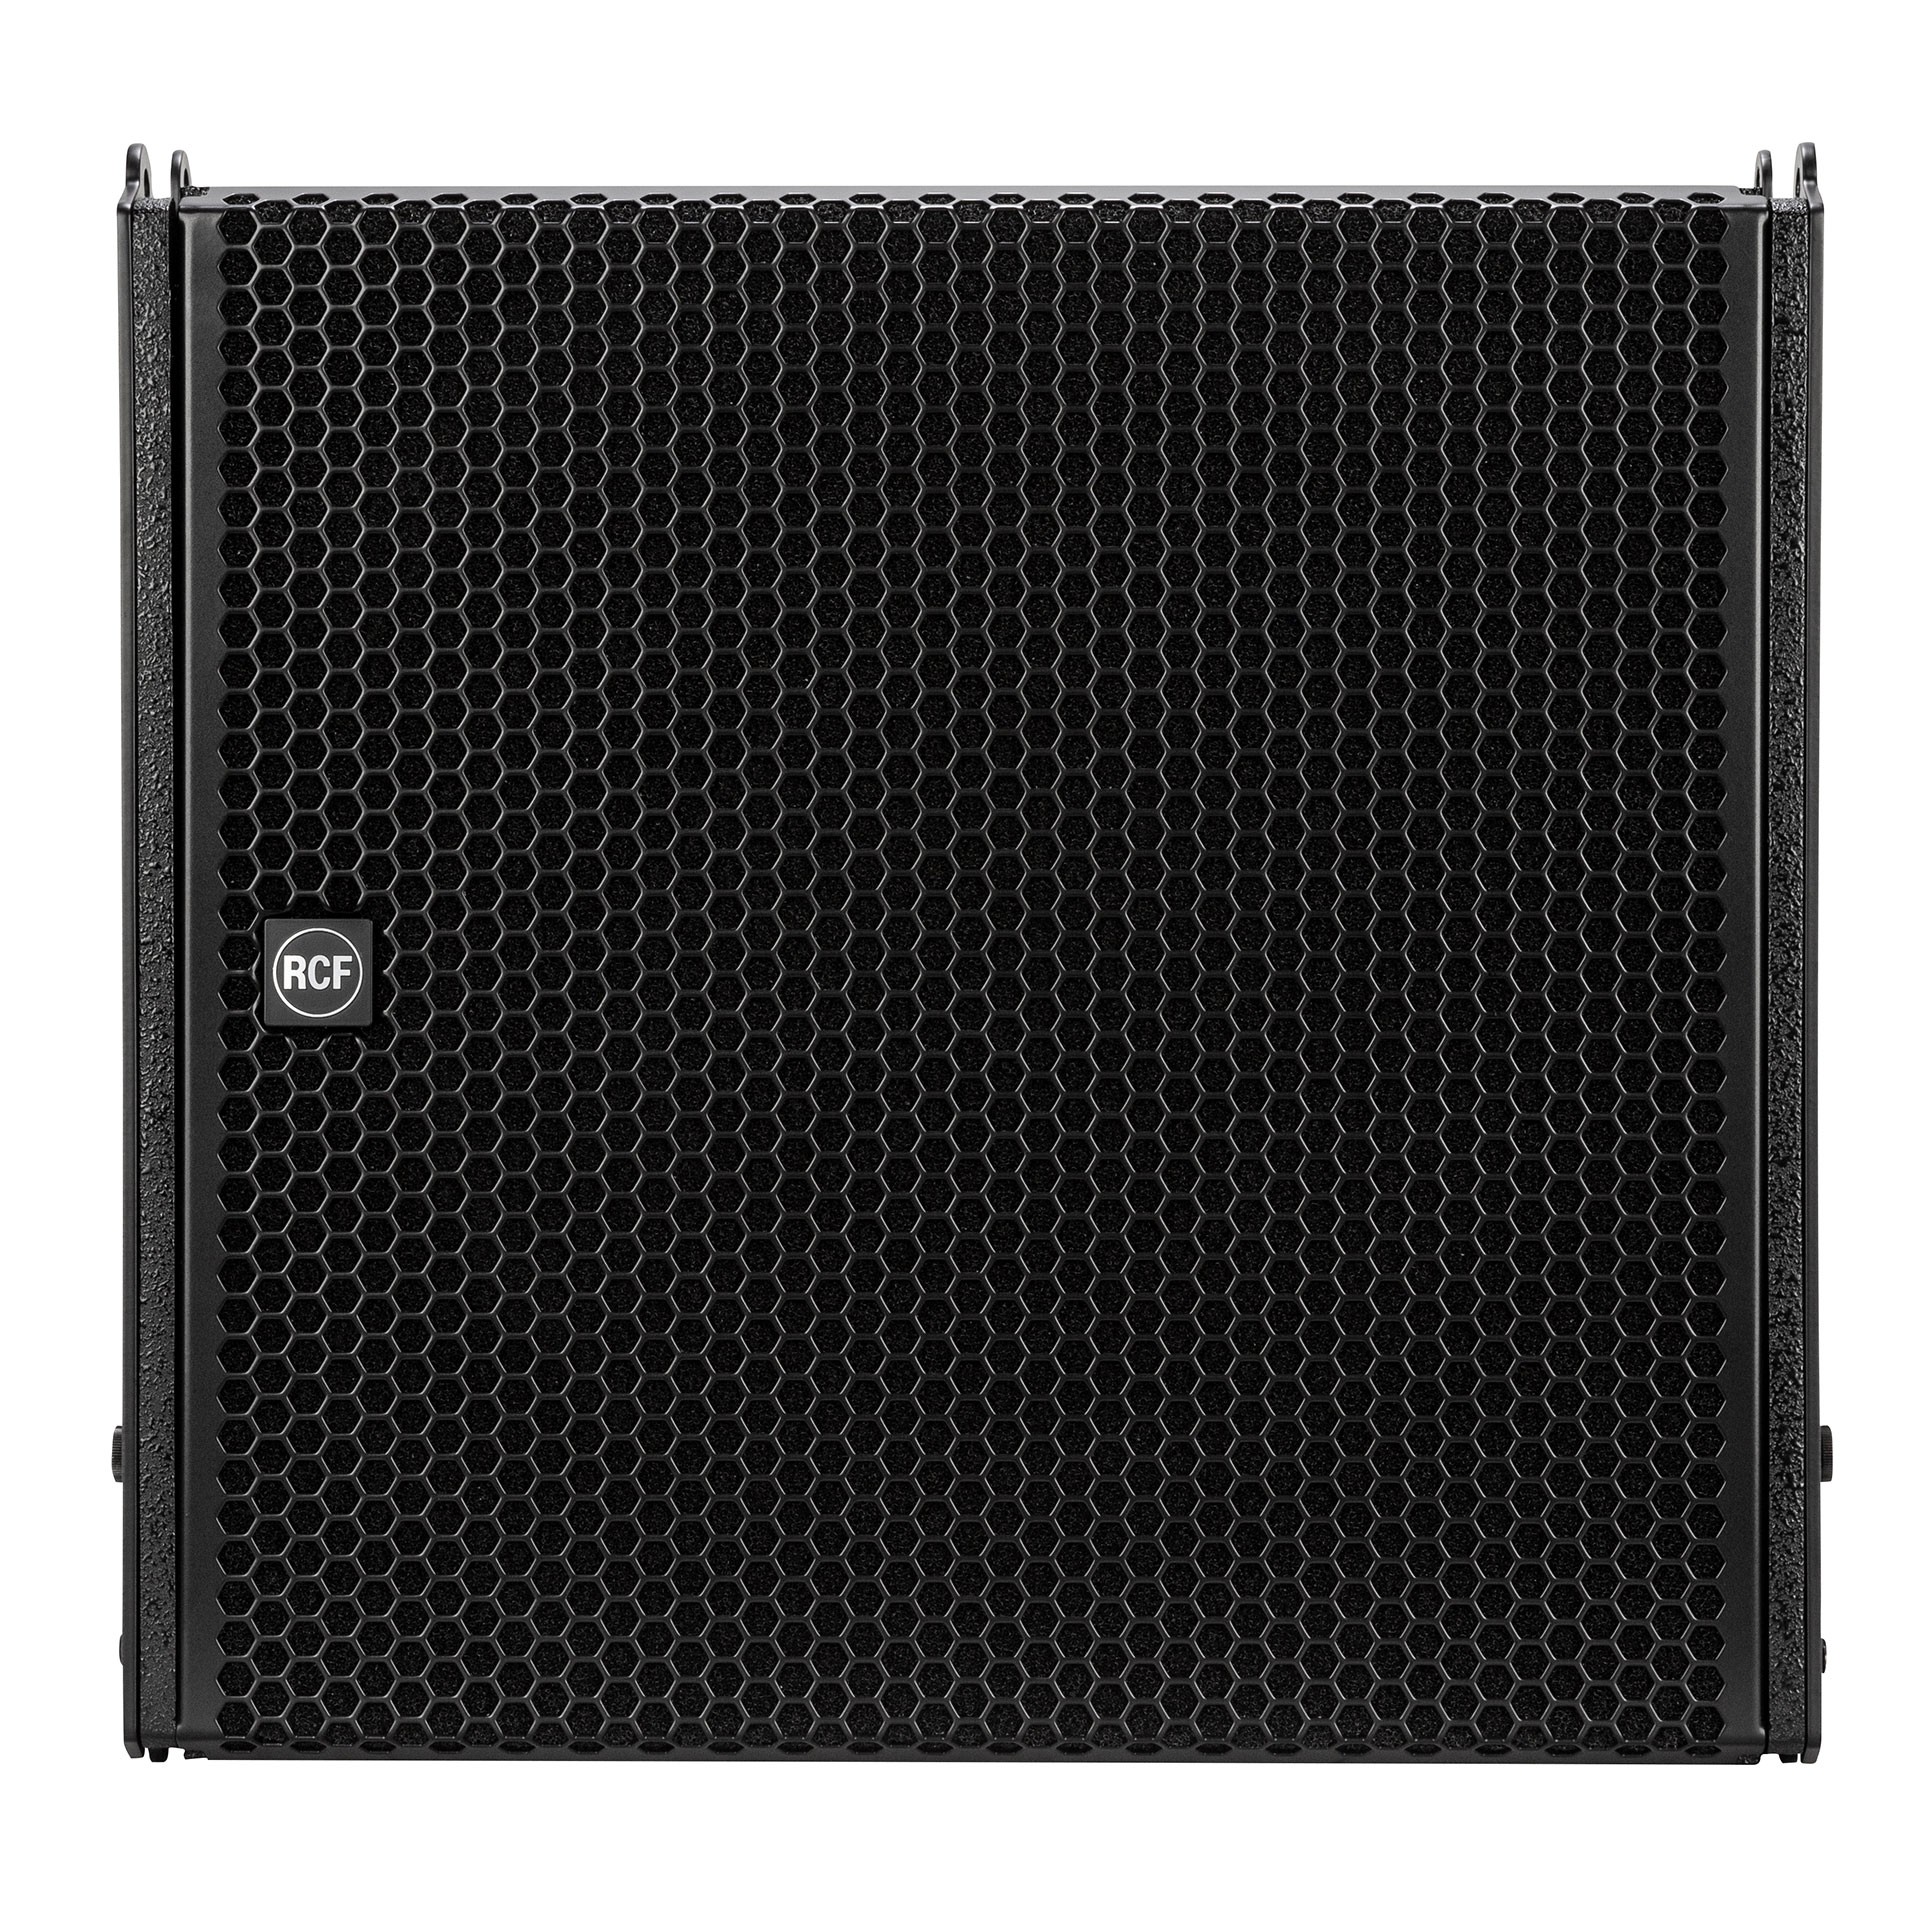 Subwoofere pro - Subwoofer activ RCF HDL 35-AS, audioclub.ro